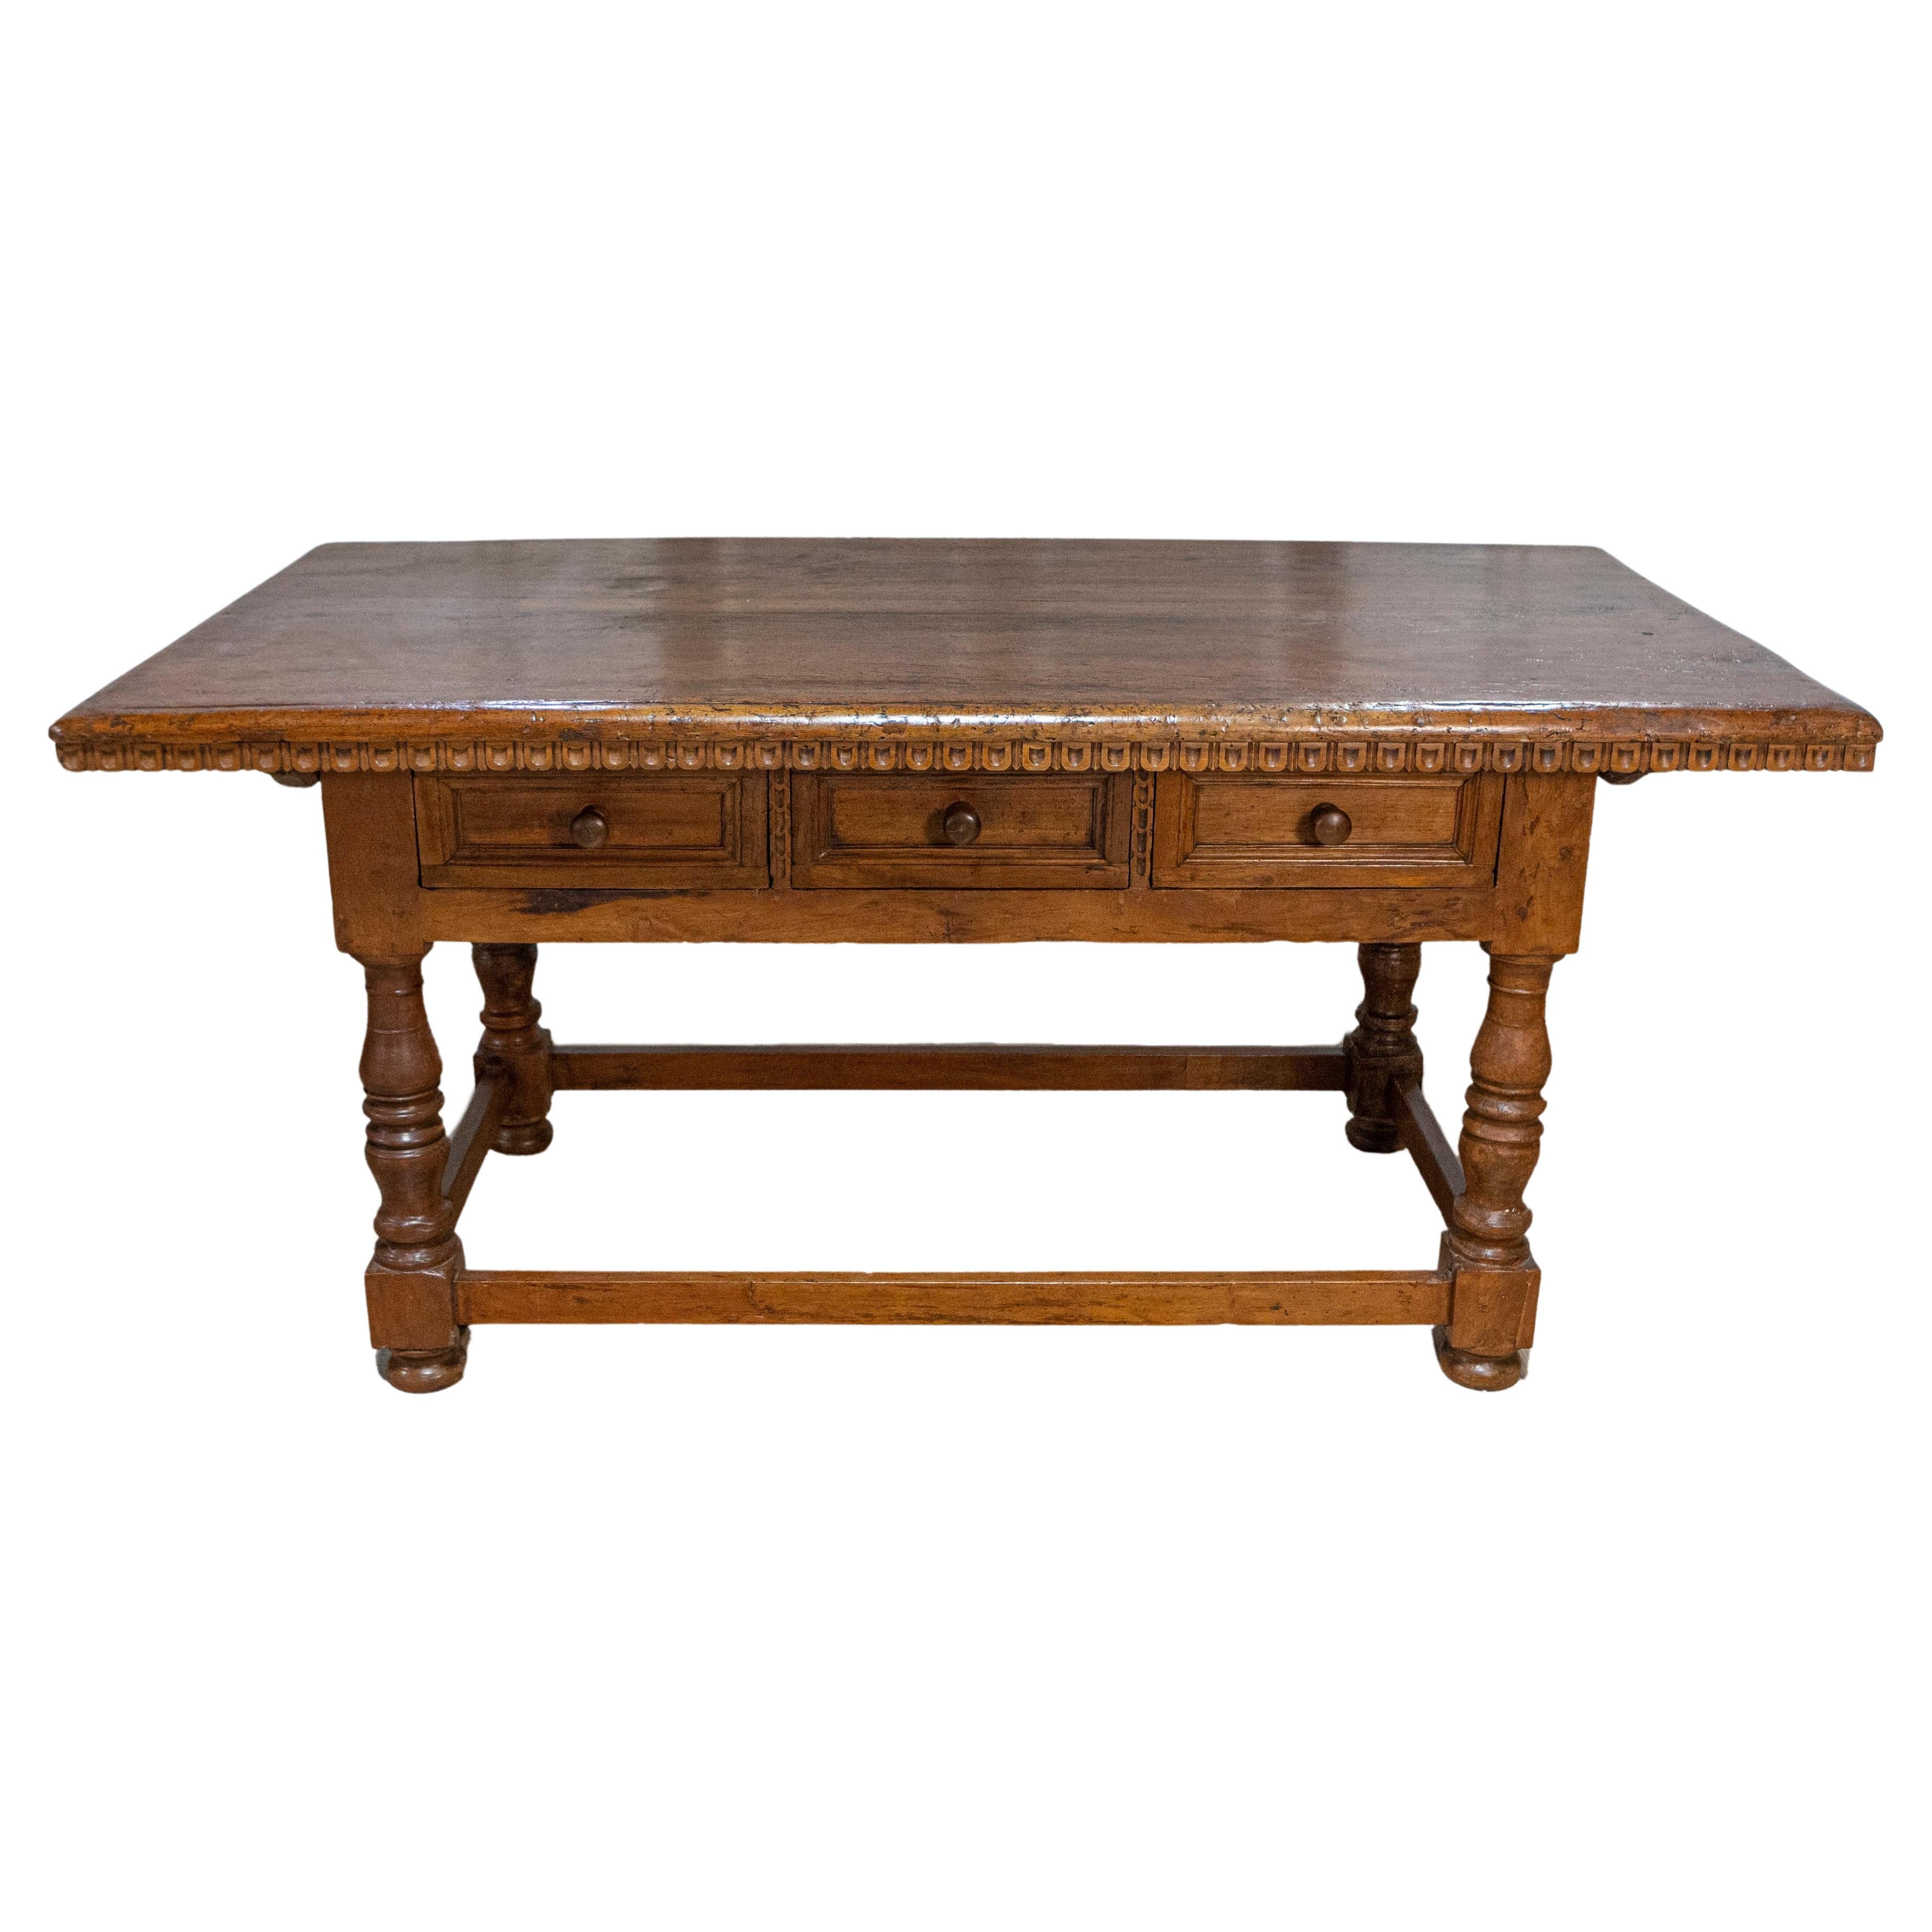 Tuscan 1790s Walnut Refectory Table with Carved Scoop Motifs and Turned Legs